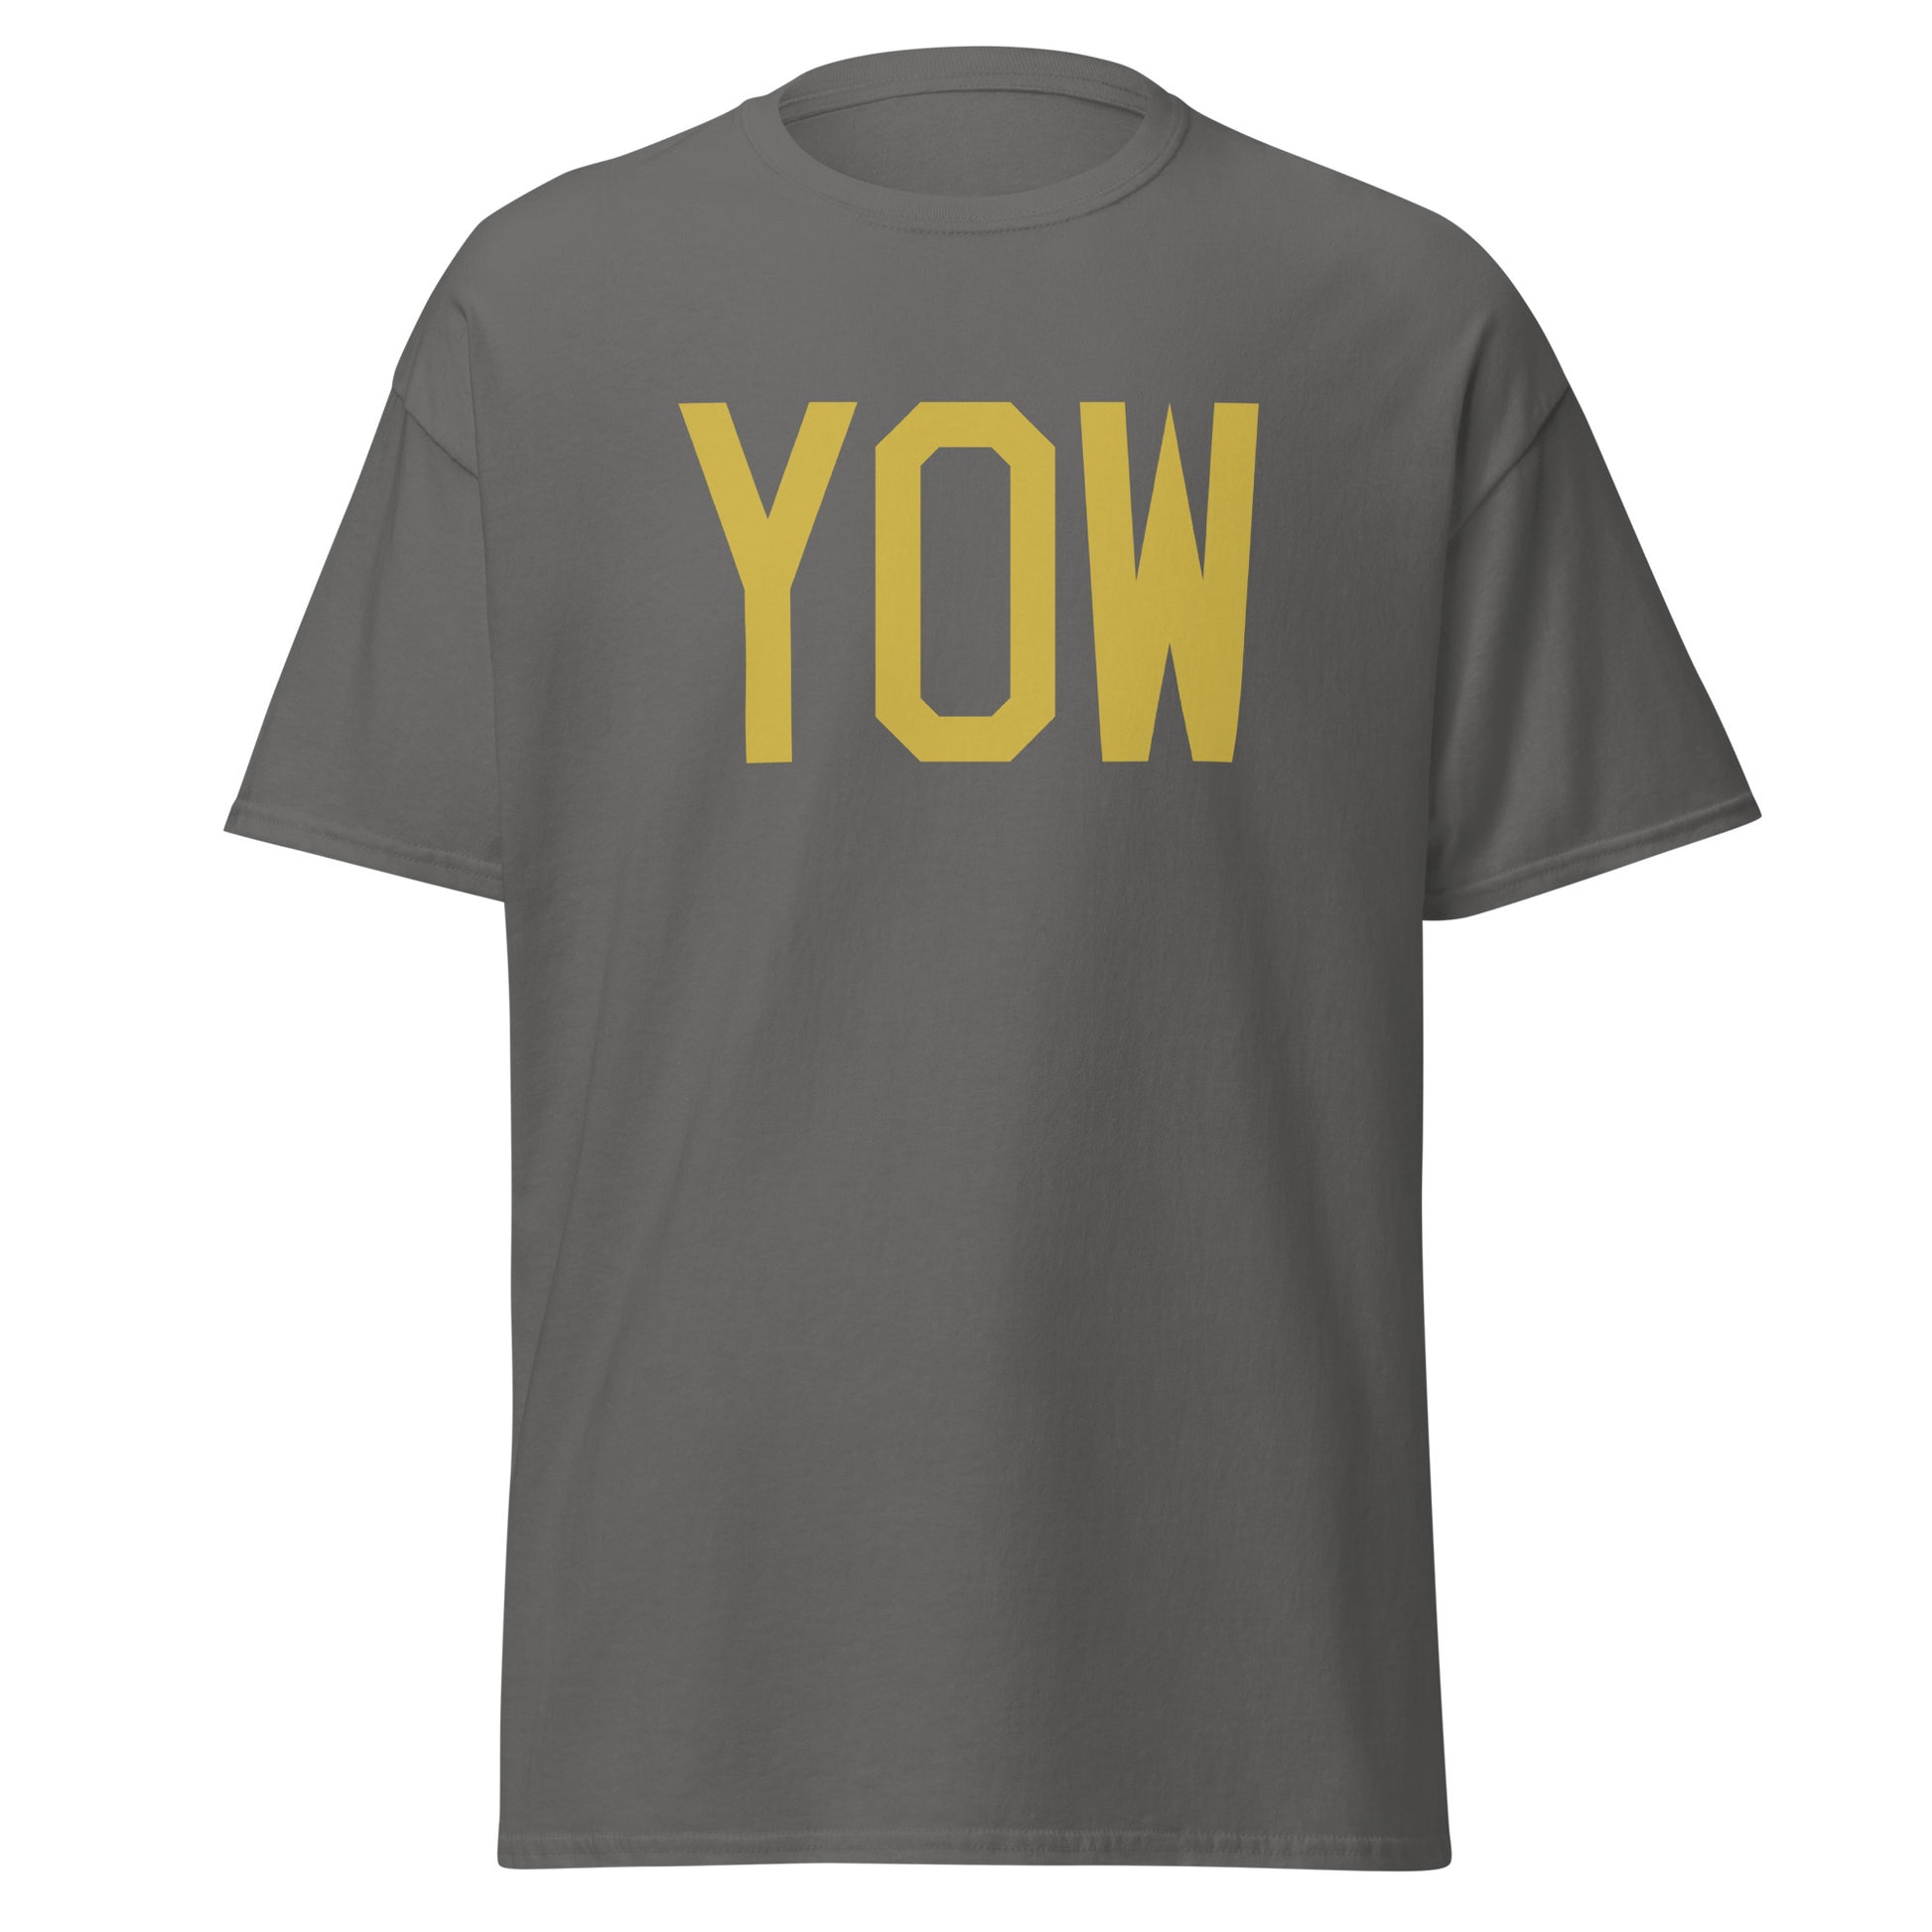 Aviation Enthusiast Men's Tee - Old Gold Graphic • YOW Ottawa • YHM Designs - Image 05